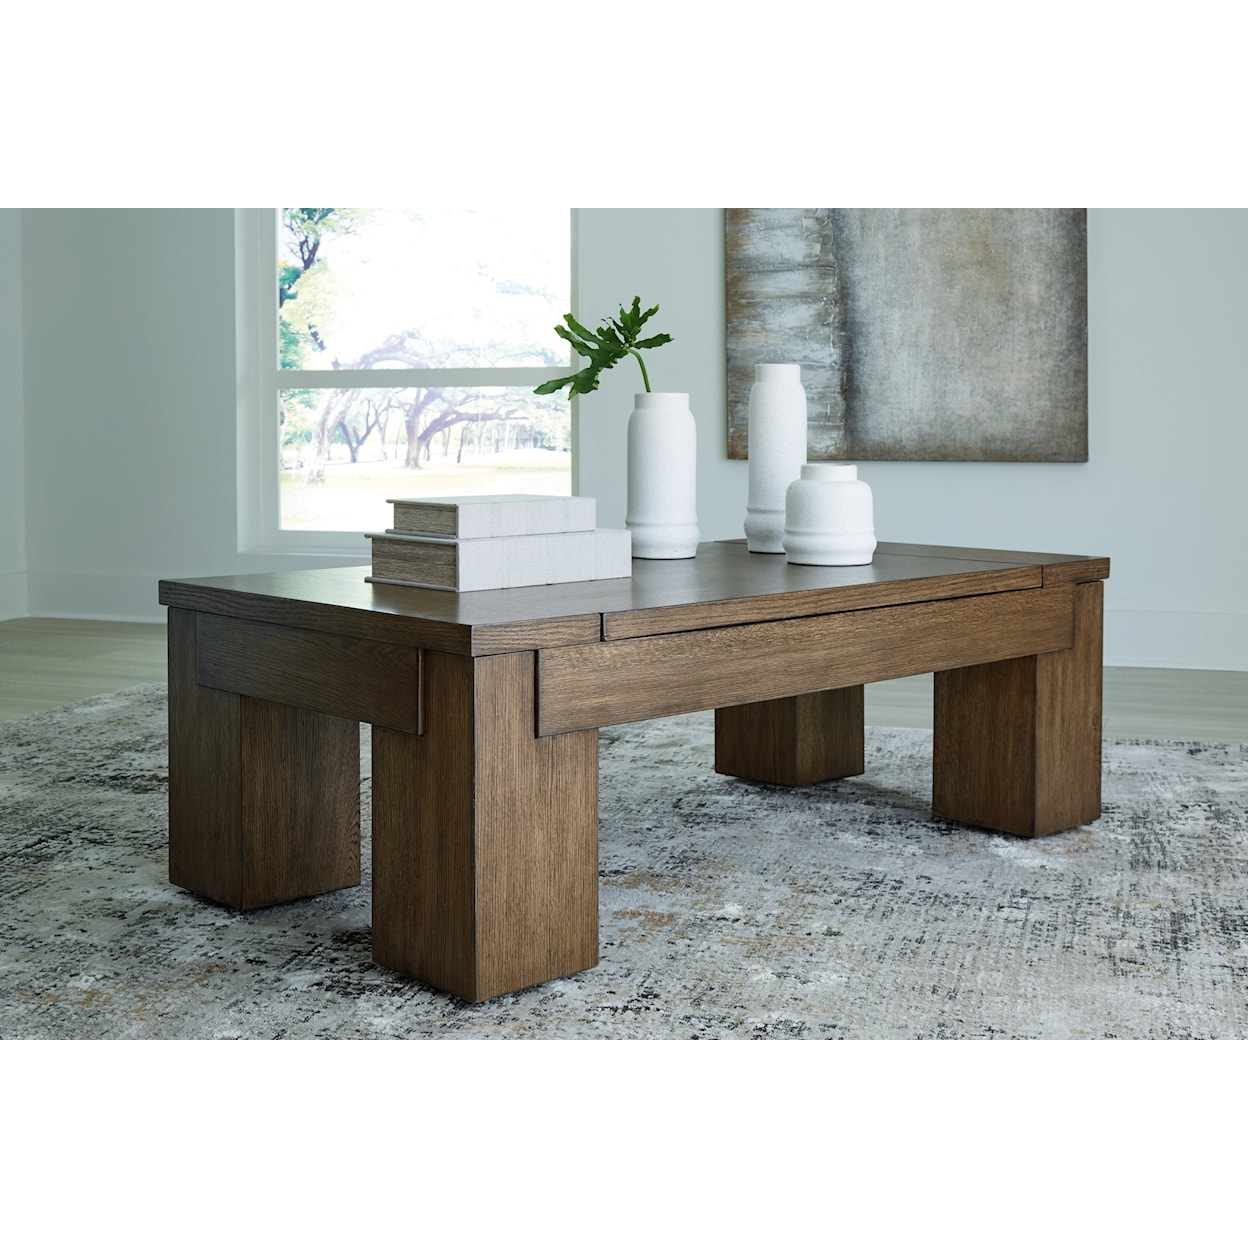 Benchcraft Rosswain Lift-top Coffee Table and 2 End Tables